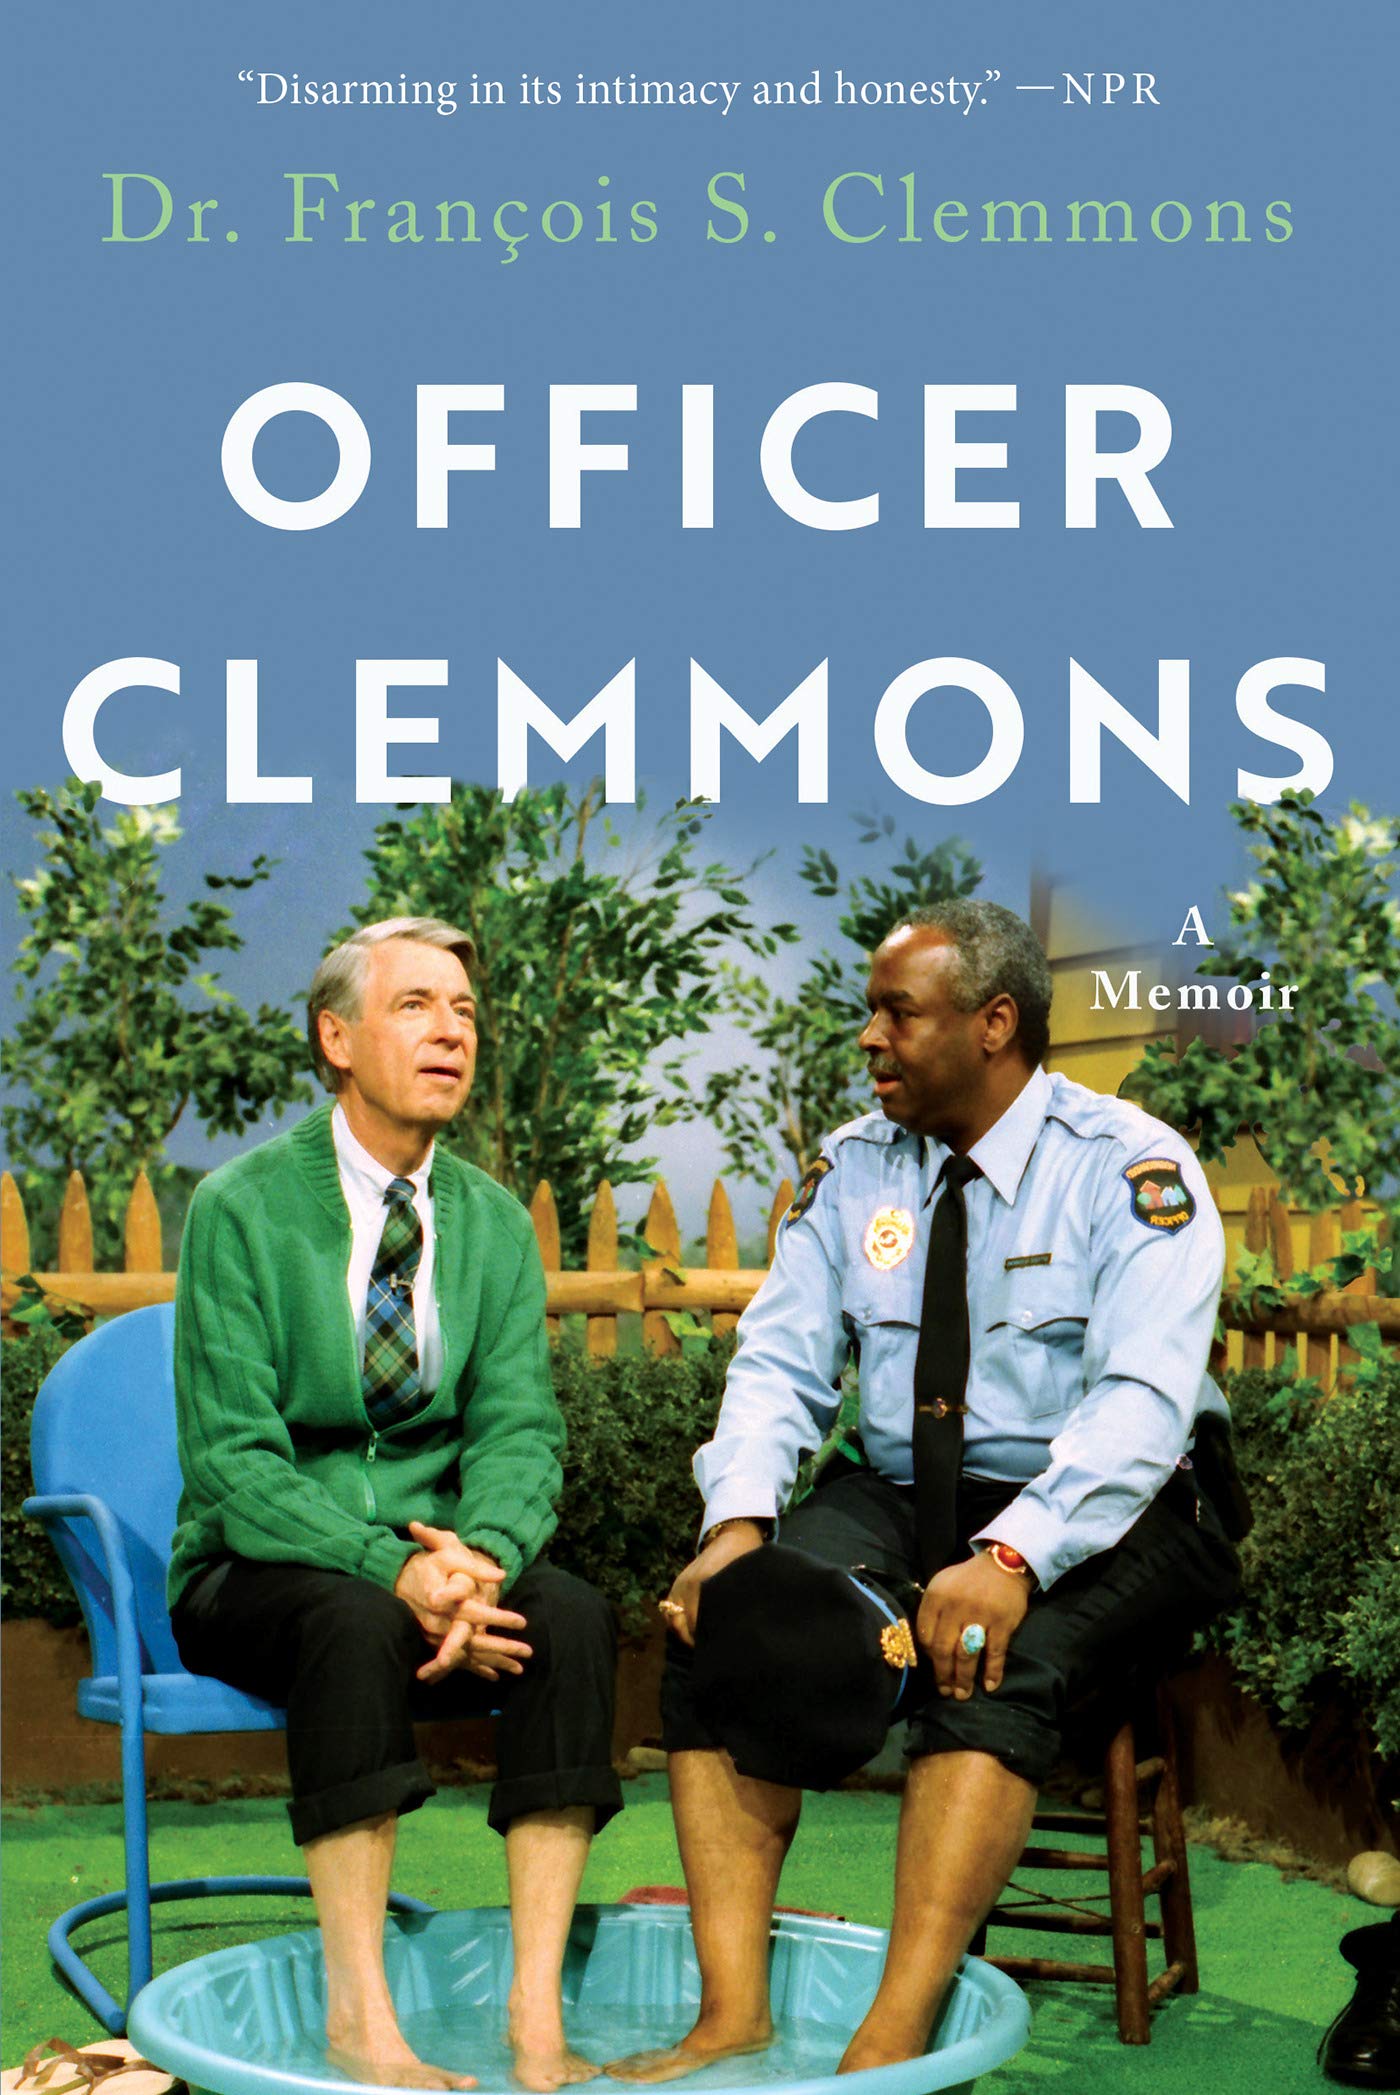 A book cover featuring a picture of Mr. Rogers and Dr. Clemmons sitting together with they feet in a small pool. Text reads: "Disarming in its intimacy and honesty." NPR. Dr. François S. Clemmons, Officer Clemmons a Memoir